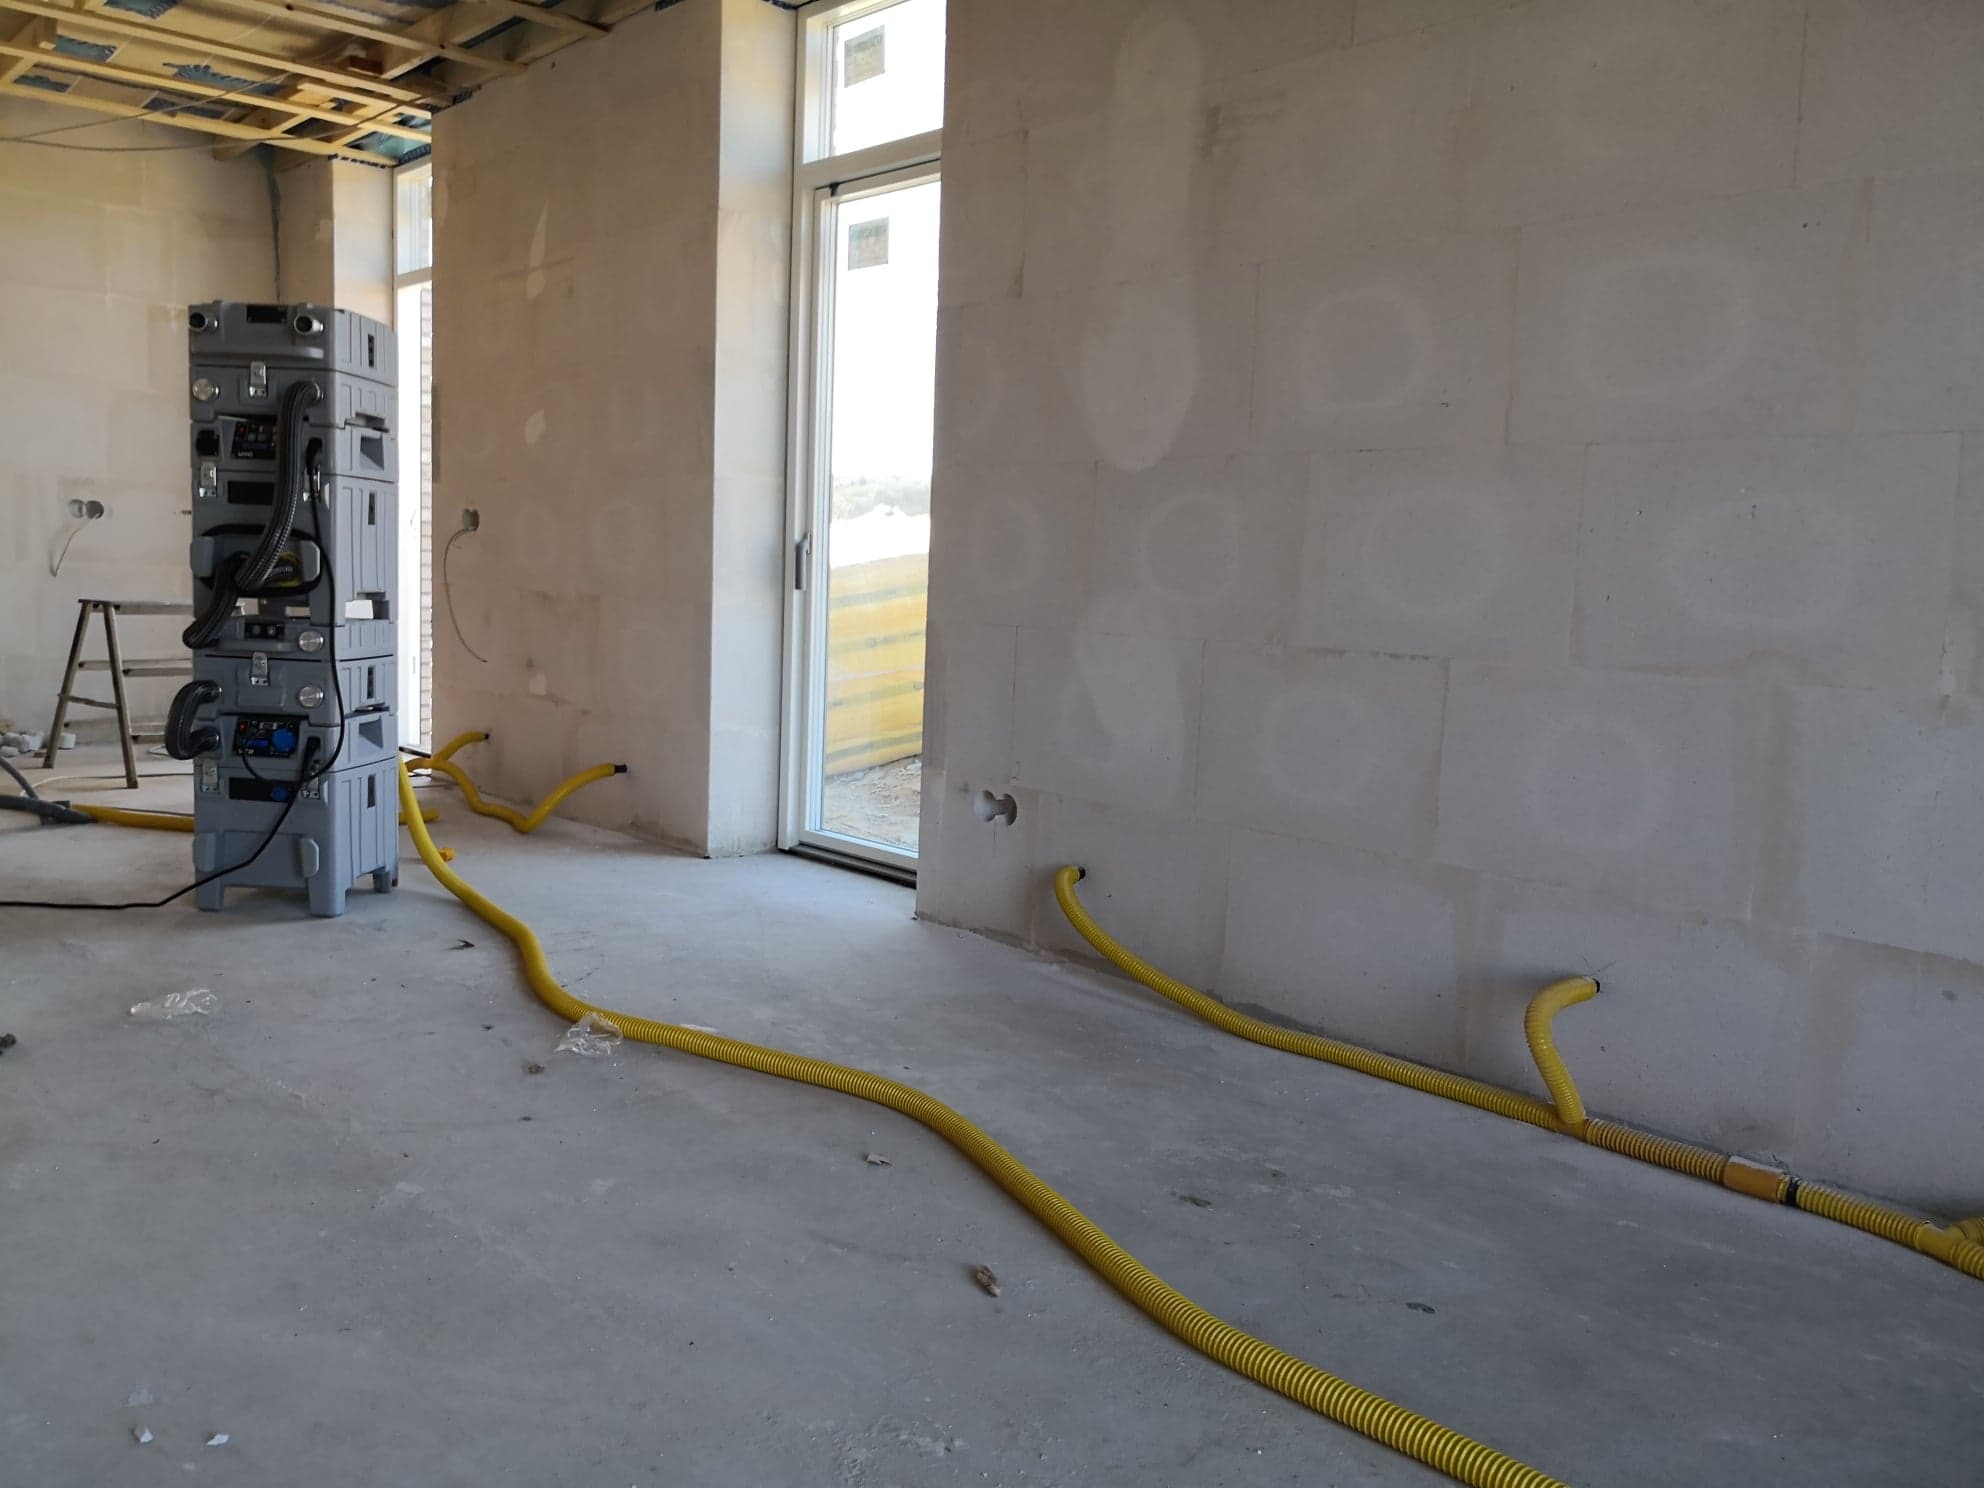 Aercube vacuum drying system drilled into walls ready for water damage drying